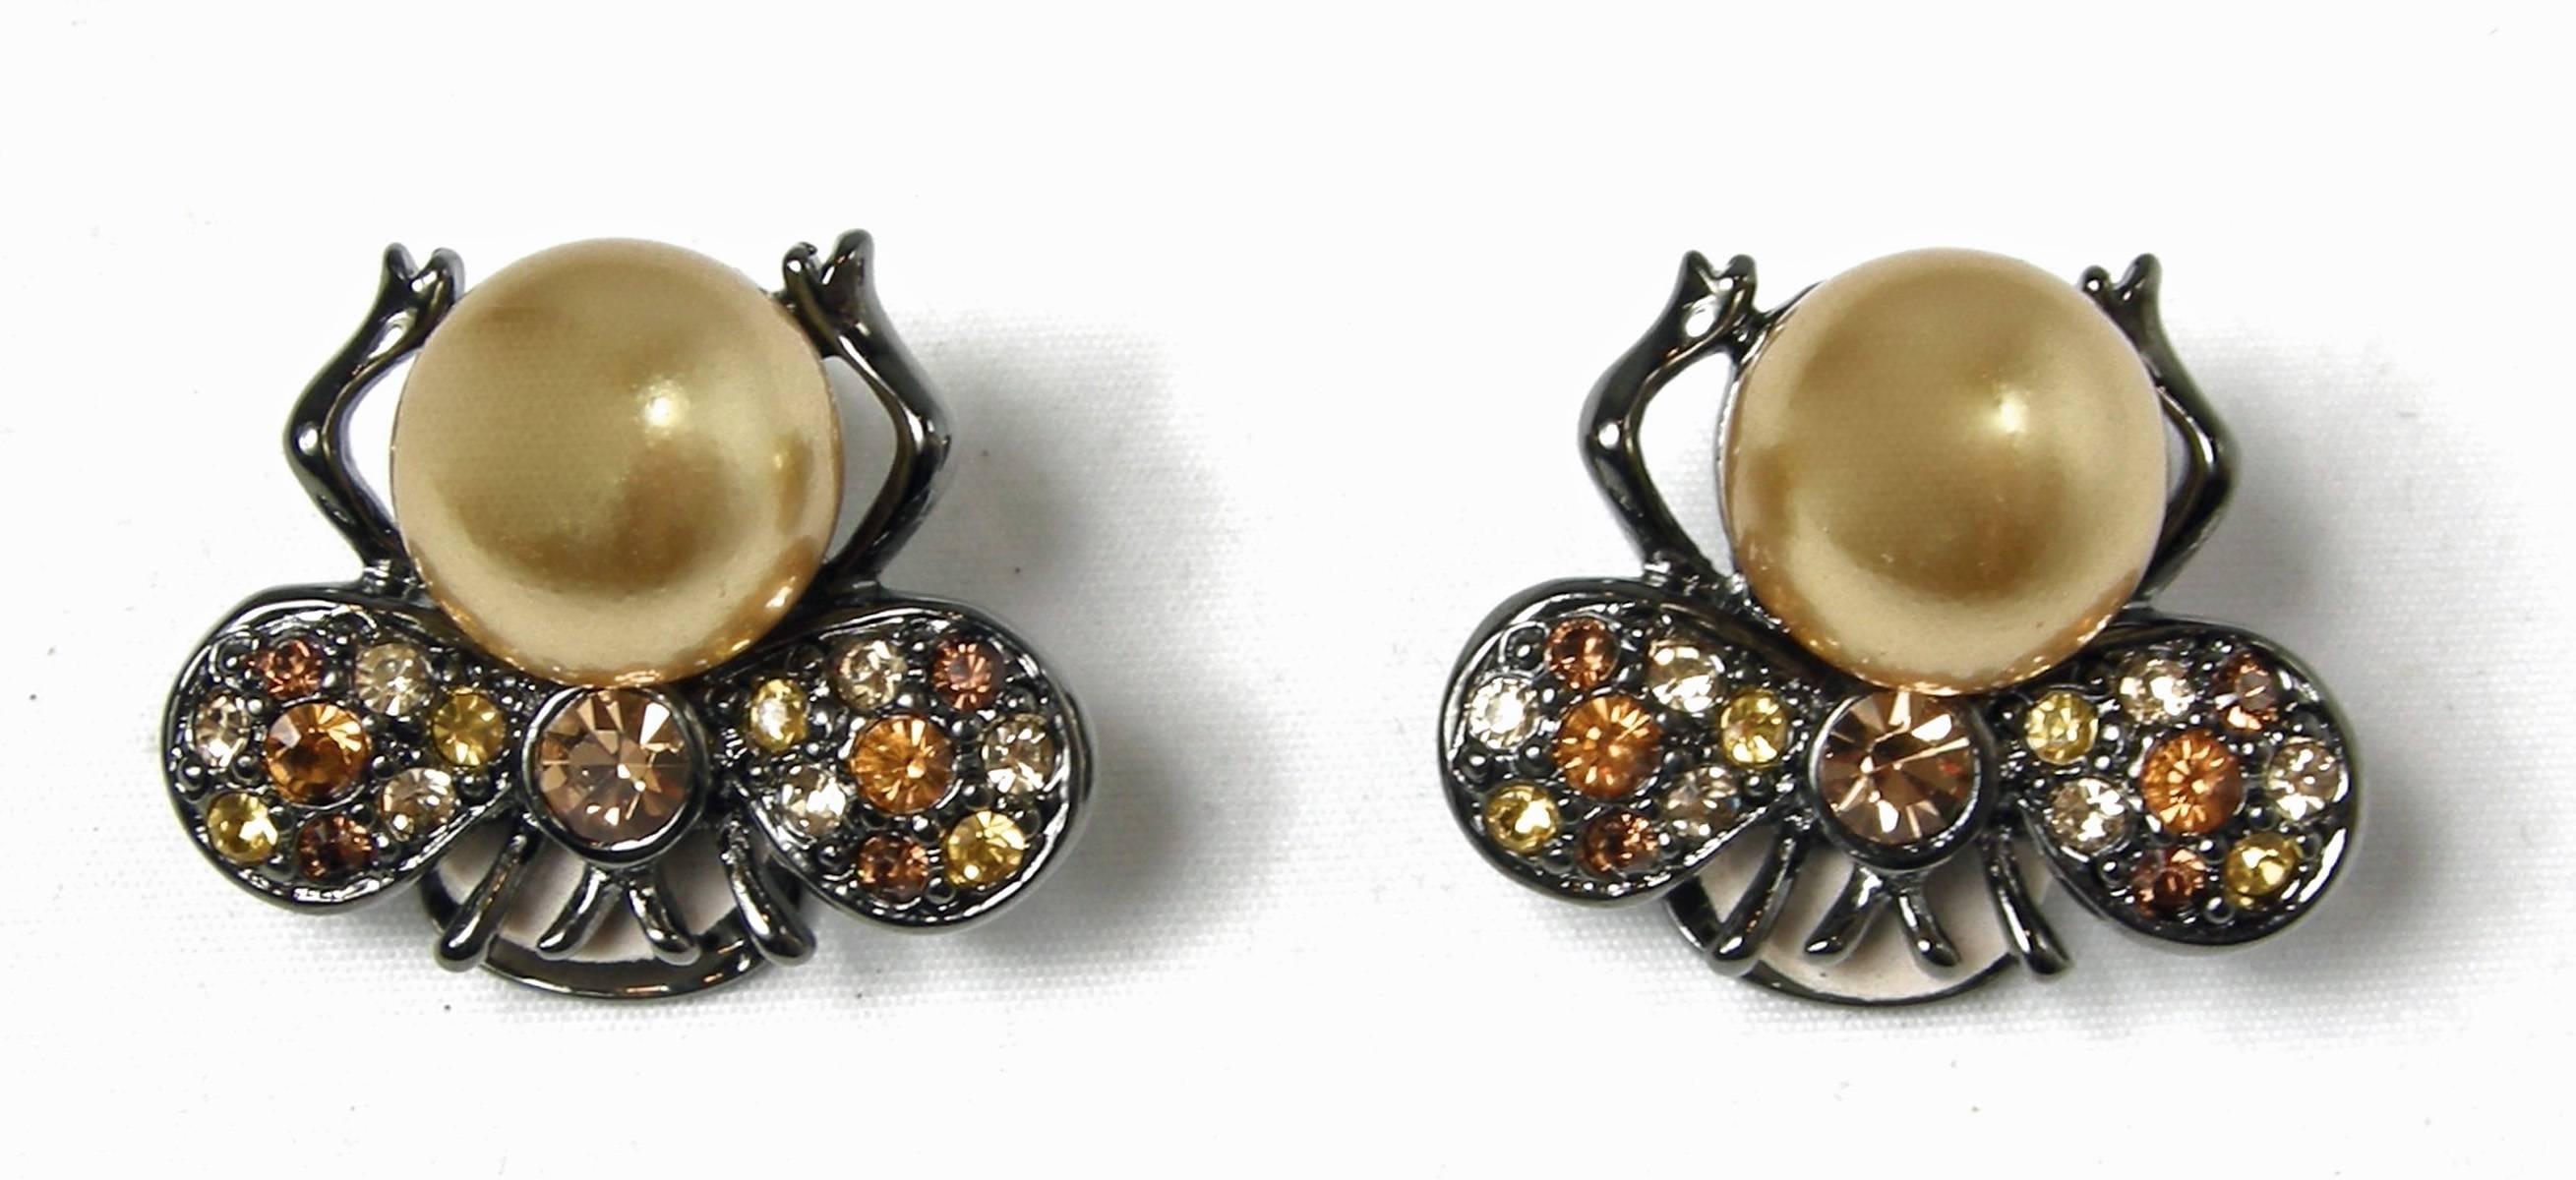 These Kenneth Jay Lane bee earrings are from his couture collection and have beautiful yellow and brown crystals. The body is a large sized cream colored faux pearl. They are set in a pewter colored glossy setting and measure 1